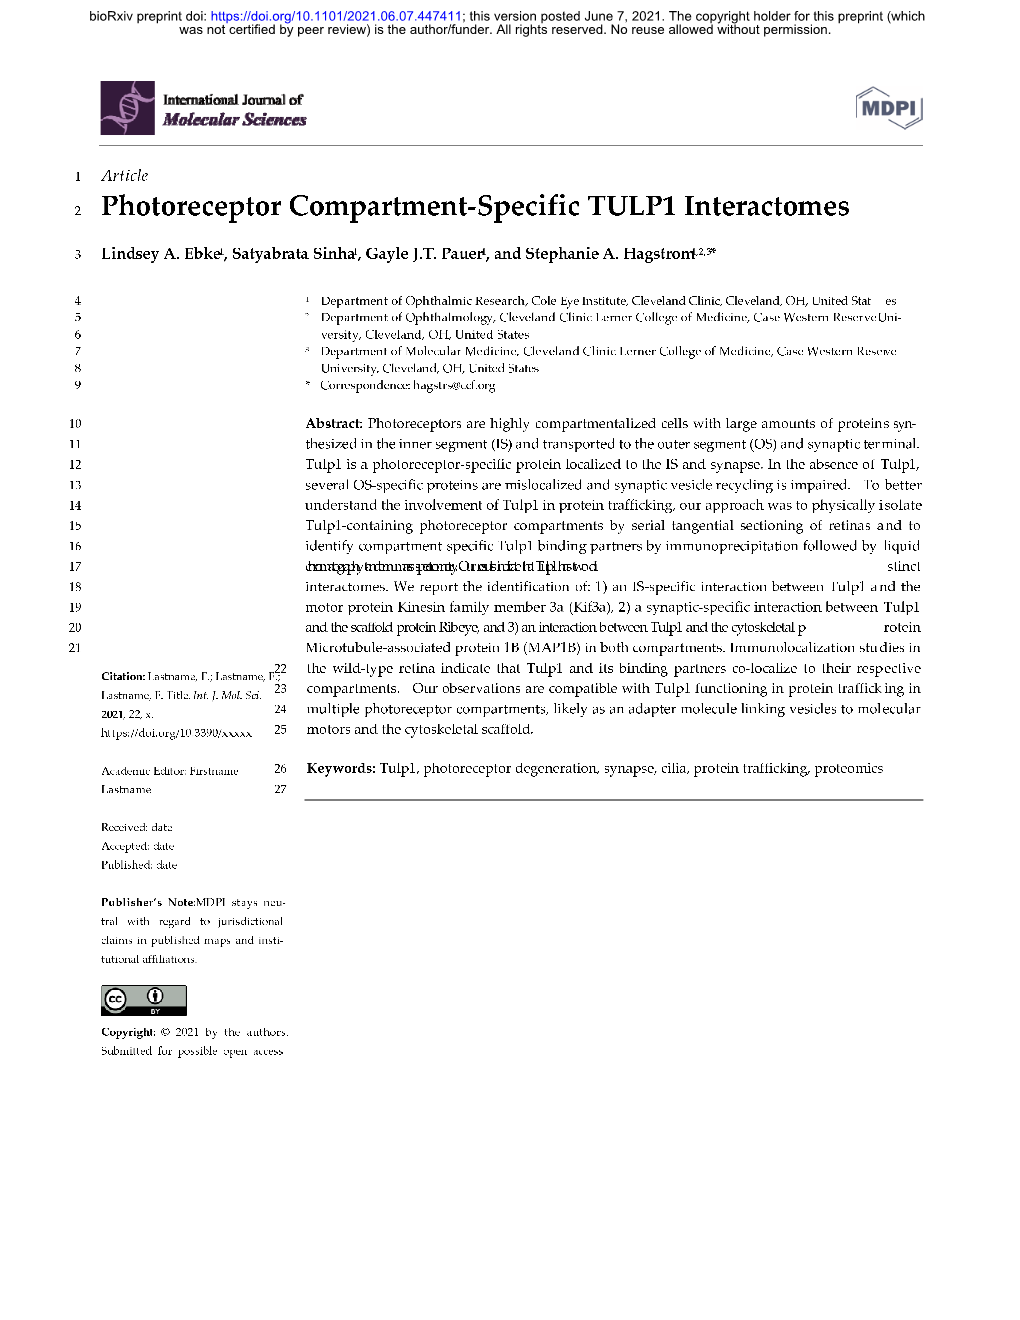 Photoreceptor Compartment-Specific TULP1 Interactomes